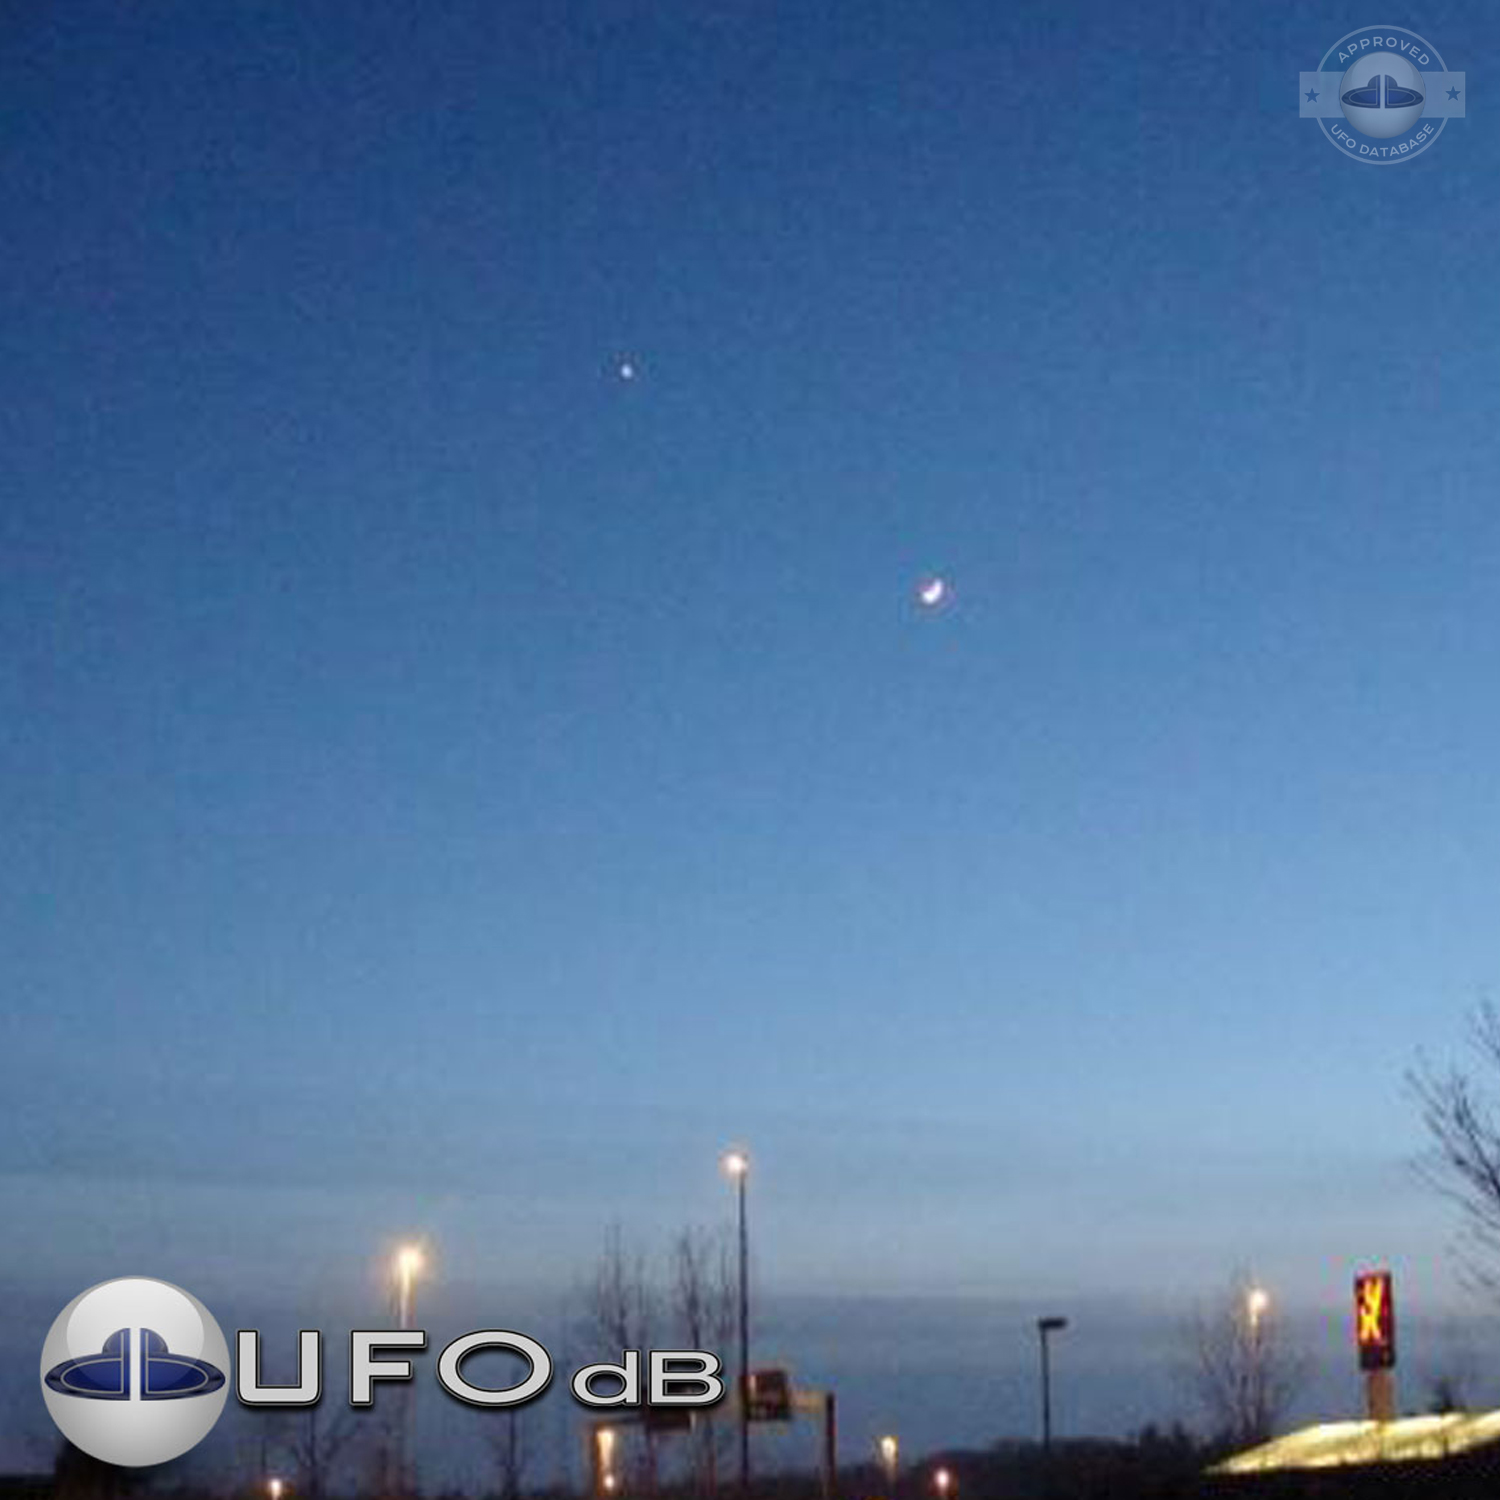 UFO picture of a UFO over a city at night fall in Denmark UFO Picture #10-2